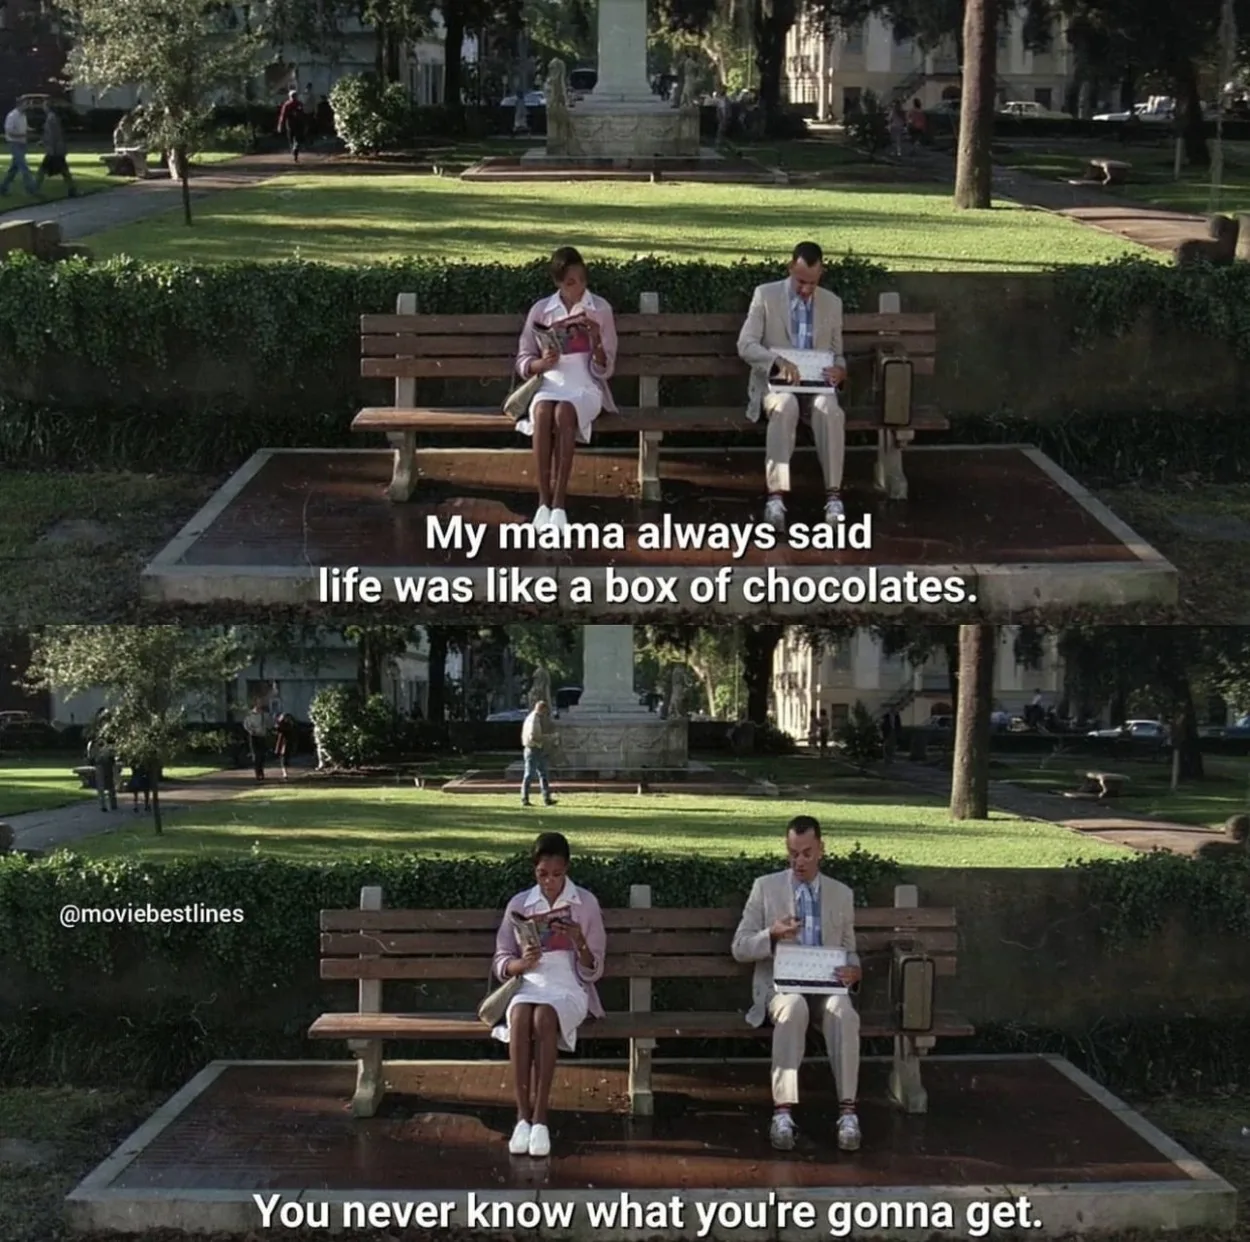 The scene from Forrest Gump movie where he is sitting on the bench